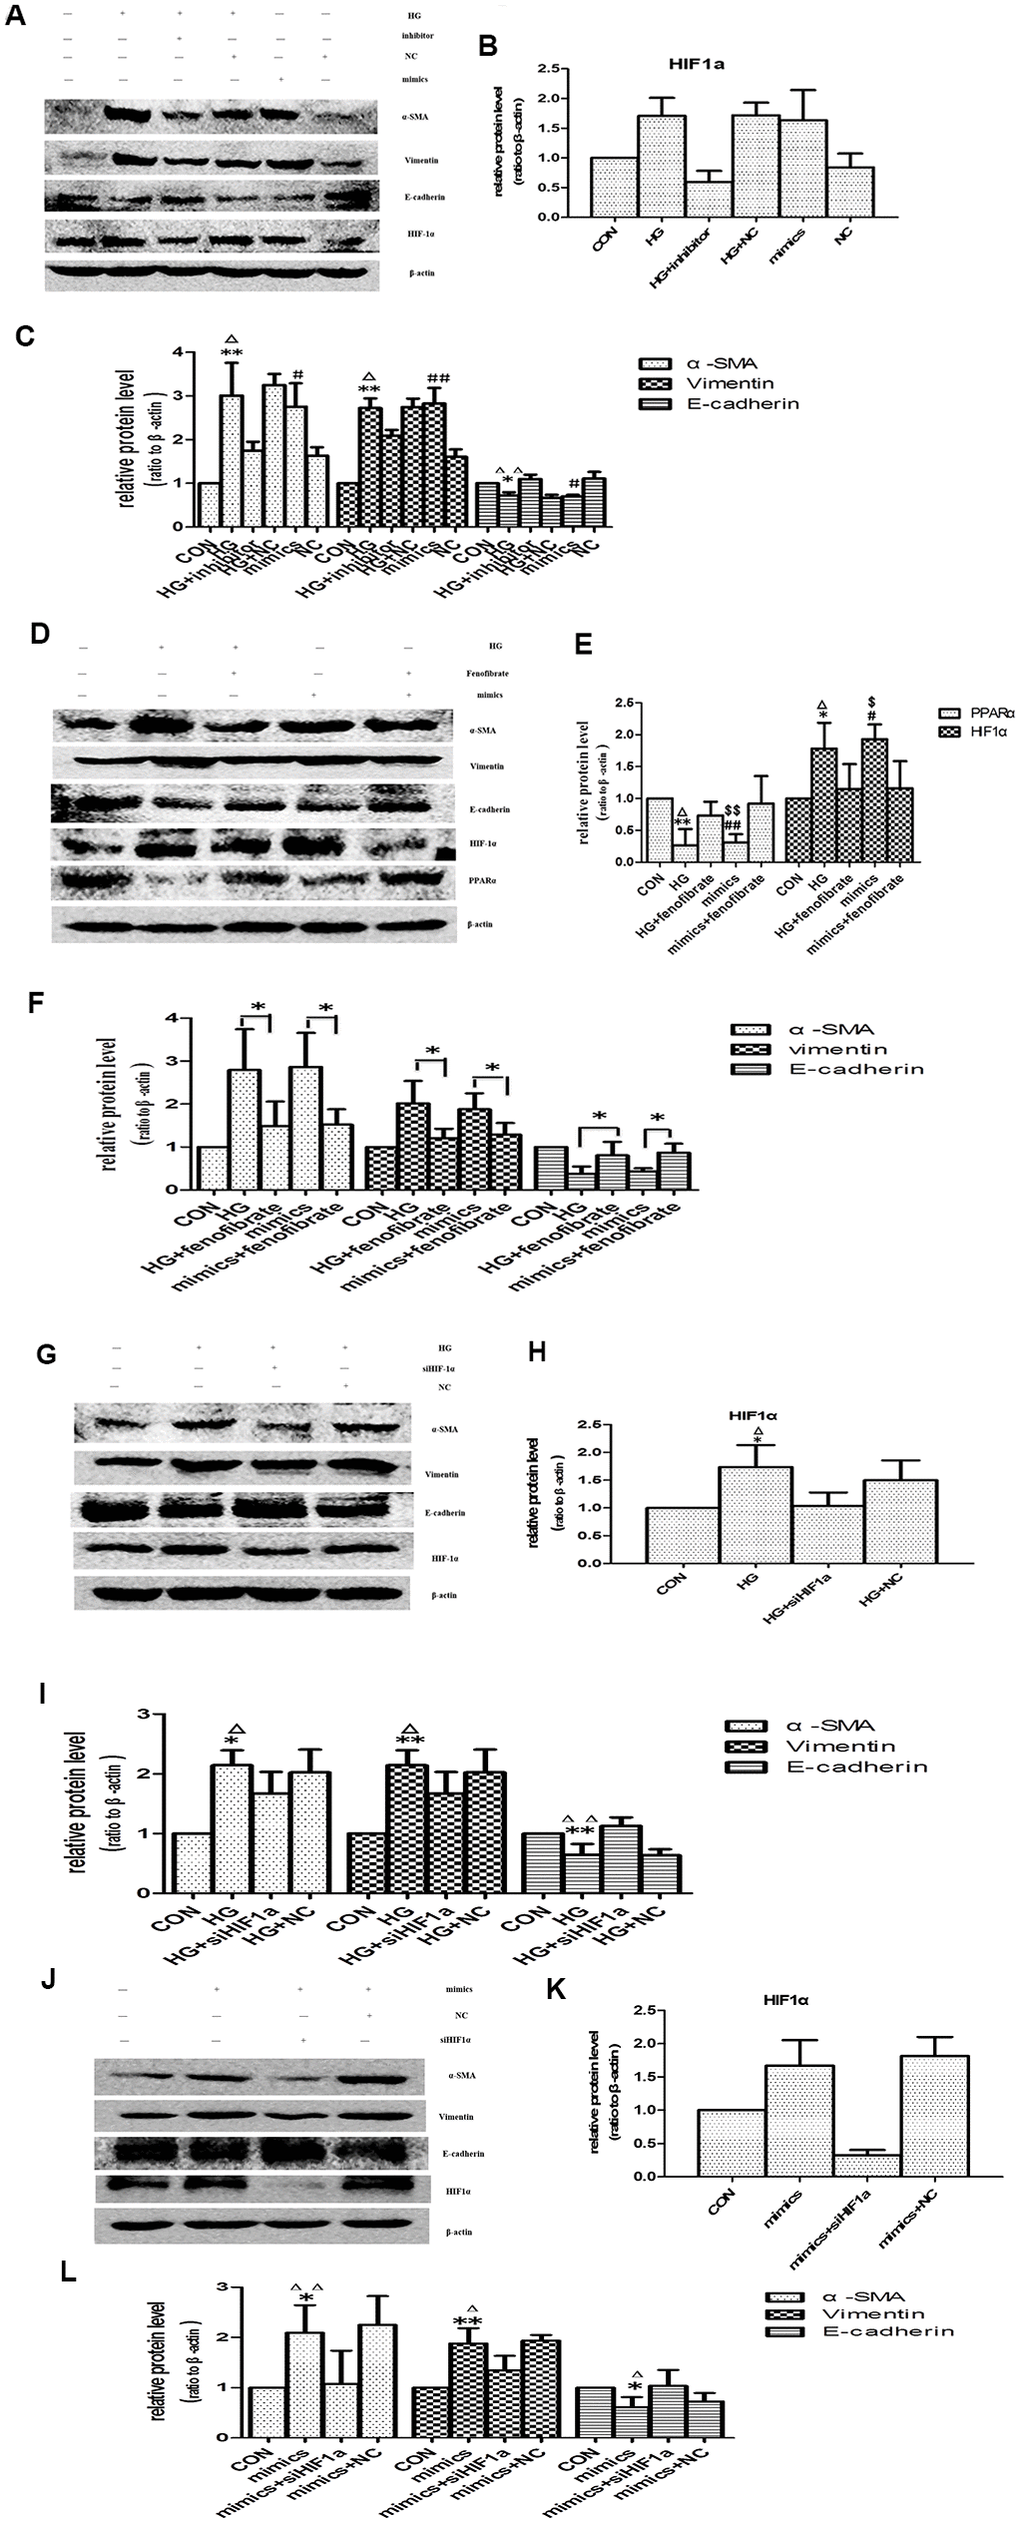 Effects of miR-21 on PPARα/HIF-1α signaling. (A) Cells incubated under normal glucose (CON), high glucose (HG), miR-21 mimics, HG+miR-21 inhibitor, miR negative control (NC), and HG+NC for 48h were harvested for Western blot analysis of EMT marker and HIF-1α signaling. (B, C) Quantitative analysis of band density for E-cadherin, α-SMA, vimentin and HIF-1α. Data are presented as mean ± SD. * p Δp # p ΔΔ/## pD) Cells incubated under CON, HG, miR-21mimics, HG+fenofibrate, miR-21mimics+fenofibrate for 48h were harvested for Western blot analysis of EMT marker and PPARα/HIF-1α signaling. (E, F) Quantitative analysis of band density for E-cadherin, α-SMA, vimentin, PPARα and HIF-1α. Data are presented as mean ± SD. * p Δp # p $ p ΔΔ/##/$$ pG) HPTCs treated with CON, HG, HG+ siHIF-1α, and HG+ si-con (NC) for 48 h were harvested for Western blot analysis of EMT marker and HIF-1α signaling. (H, I) Quantitative analysis of band density for E-cadherin, α-SMA, vimentin and HIF-1α. Data are presented as mean ±SD. *p Δp ΔΔpJ) HPTCs treated with CON, miR-21mimics, miR-21mimics+siHIF-1α, and miR-21mimics+si-con (NC) for 48 h were harvested for Western blot analysis of EMT marker and HIF-1α signaling. (K, L) Quantitative analysis of band density for E-cadherin, α-SMA, vimentin and HIF-1α. Data are presented as mean ± SD. * p Δp ΔΔp